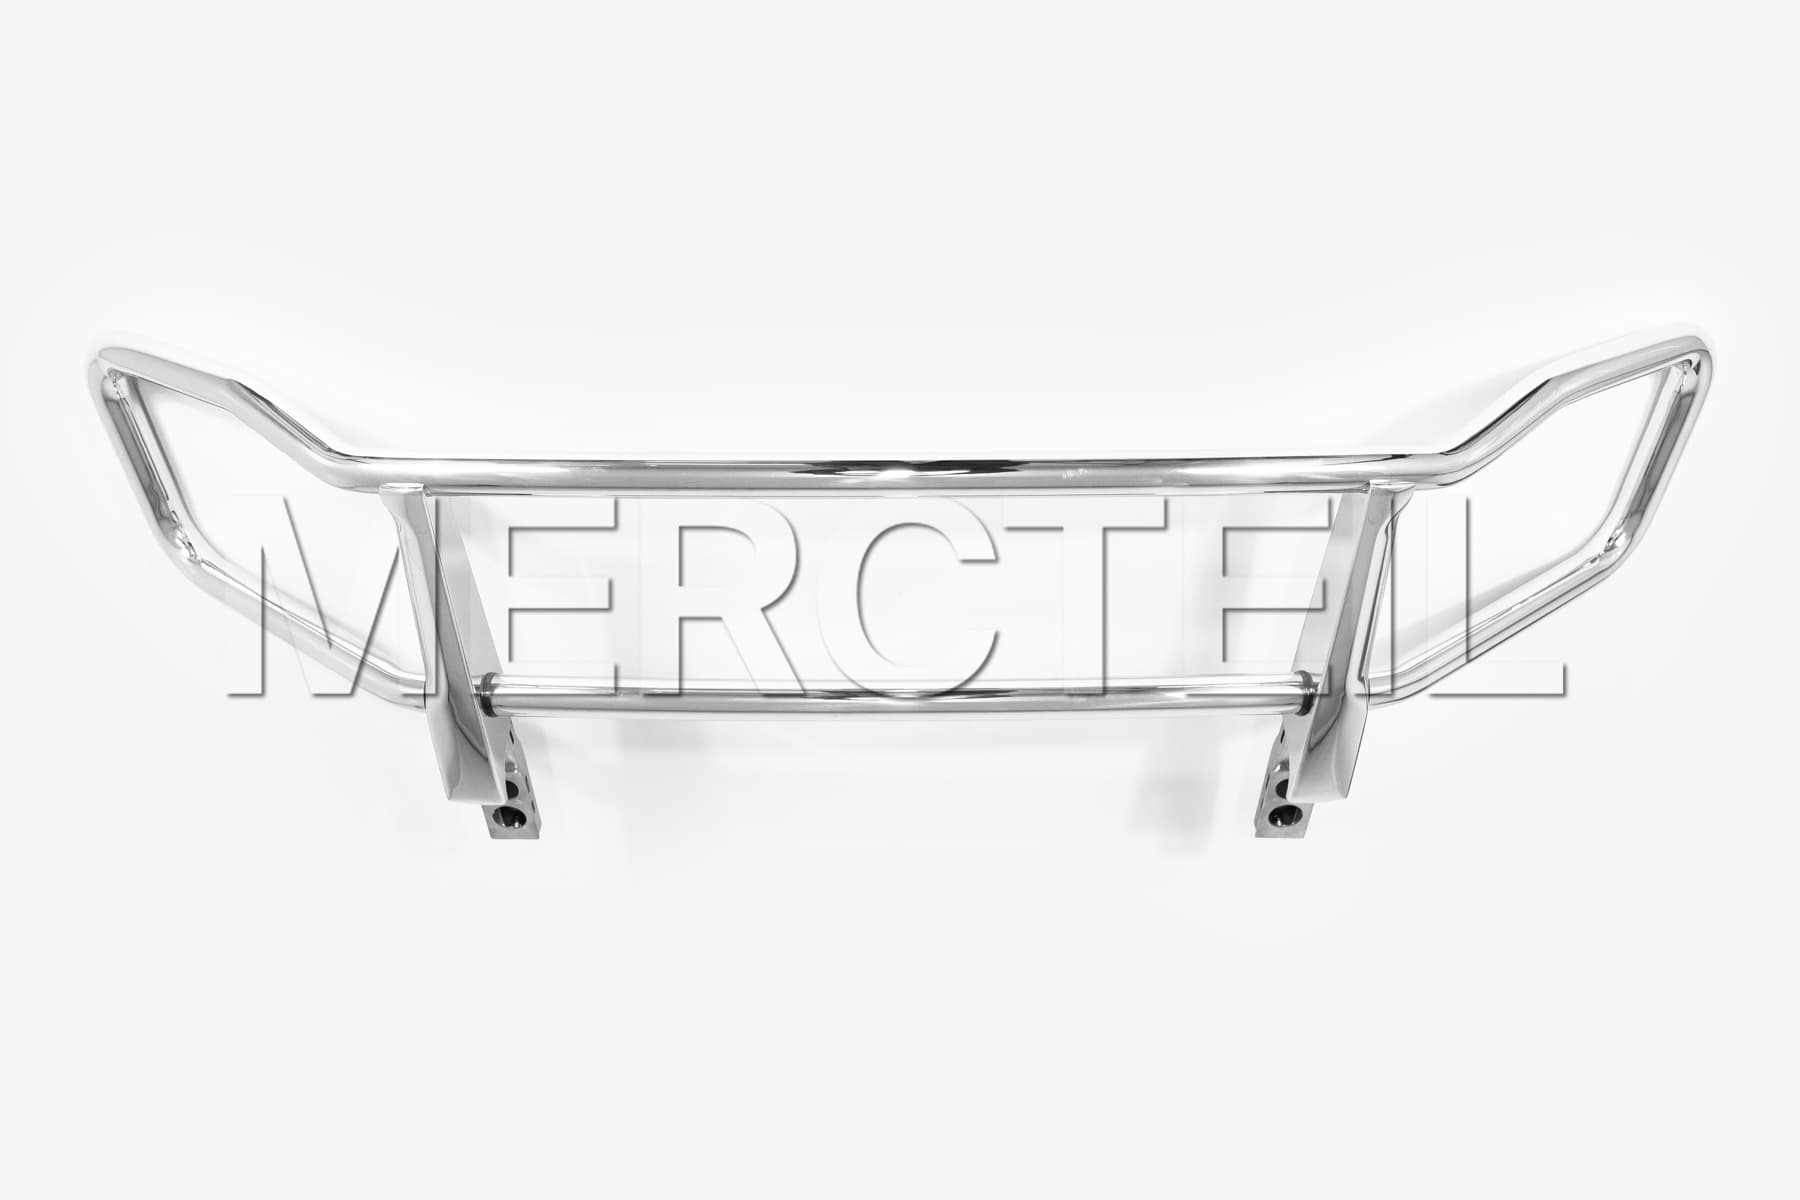 G-Class Grille Guard / Brush Guard Kit W463A Genuine Mercedes-AMG (Part number: A46388051009999)